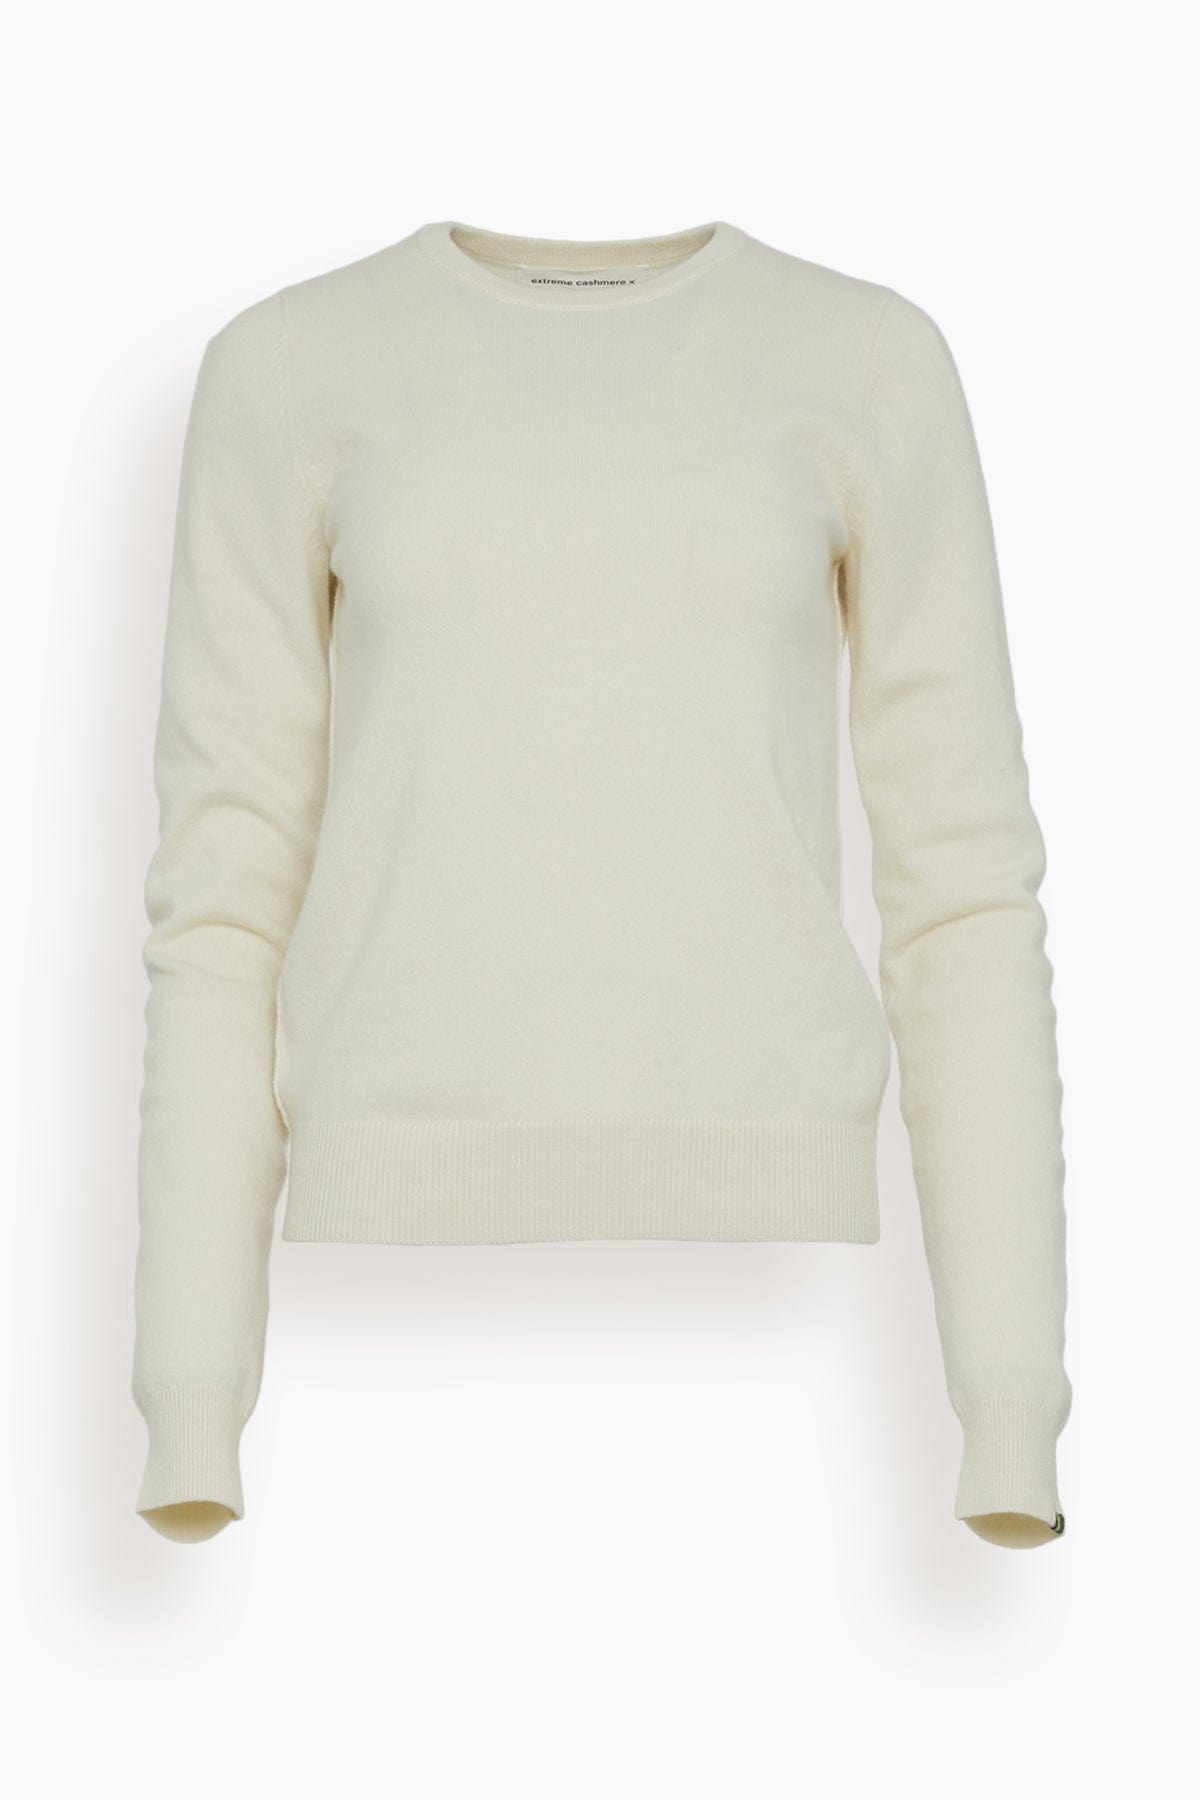 Extreme Cashmere Sweaters Body Sweater in Cream